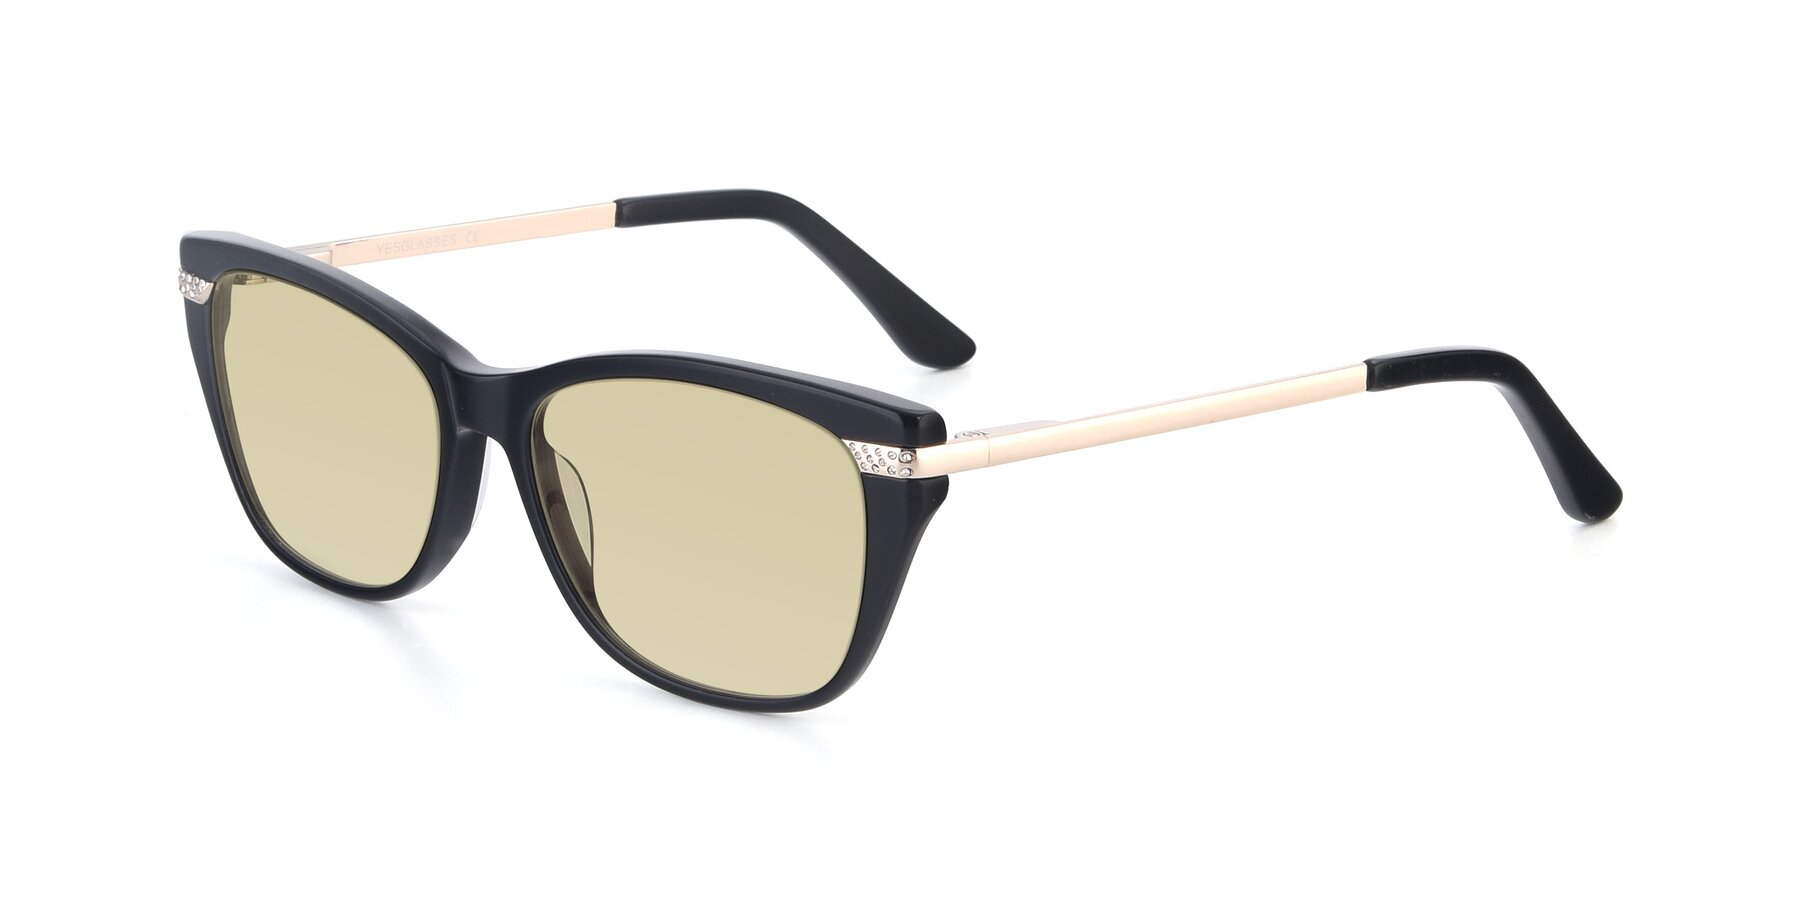 Angle of 17515 in Black with Light Champagne Tinted Lenses